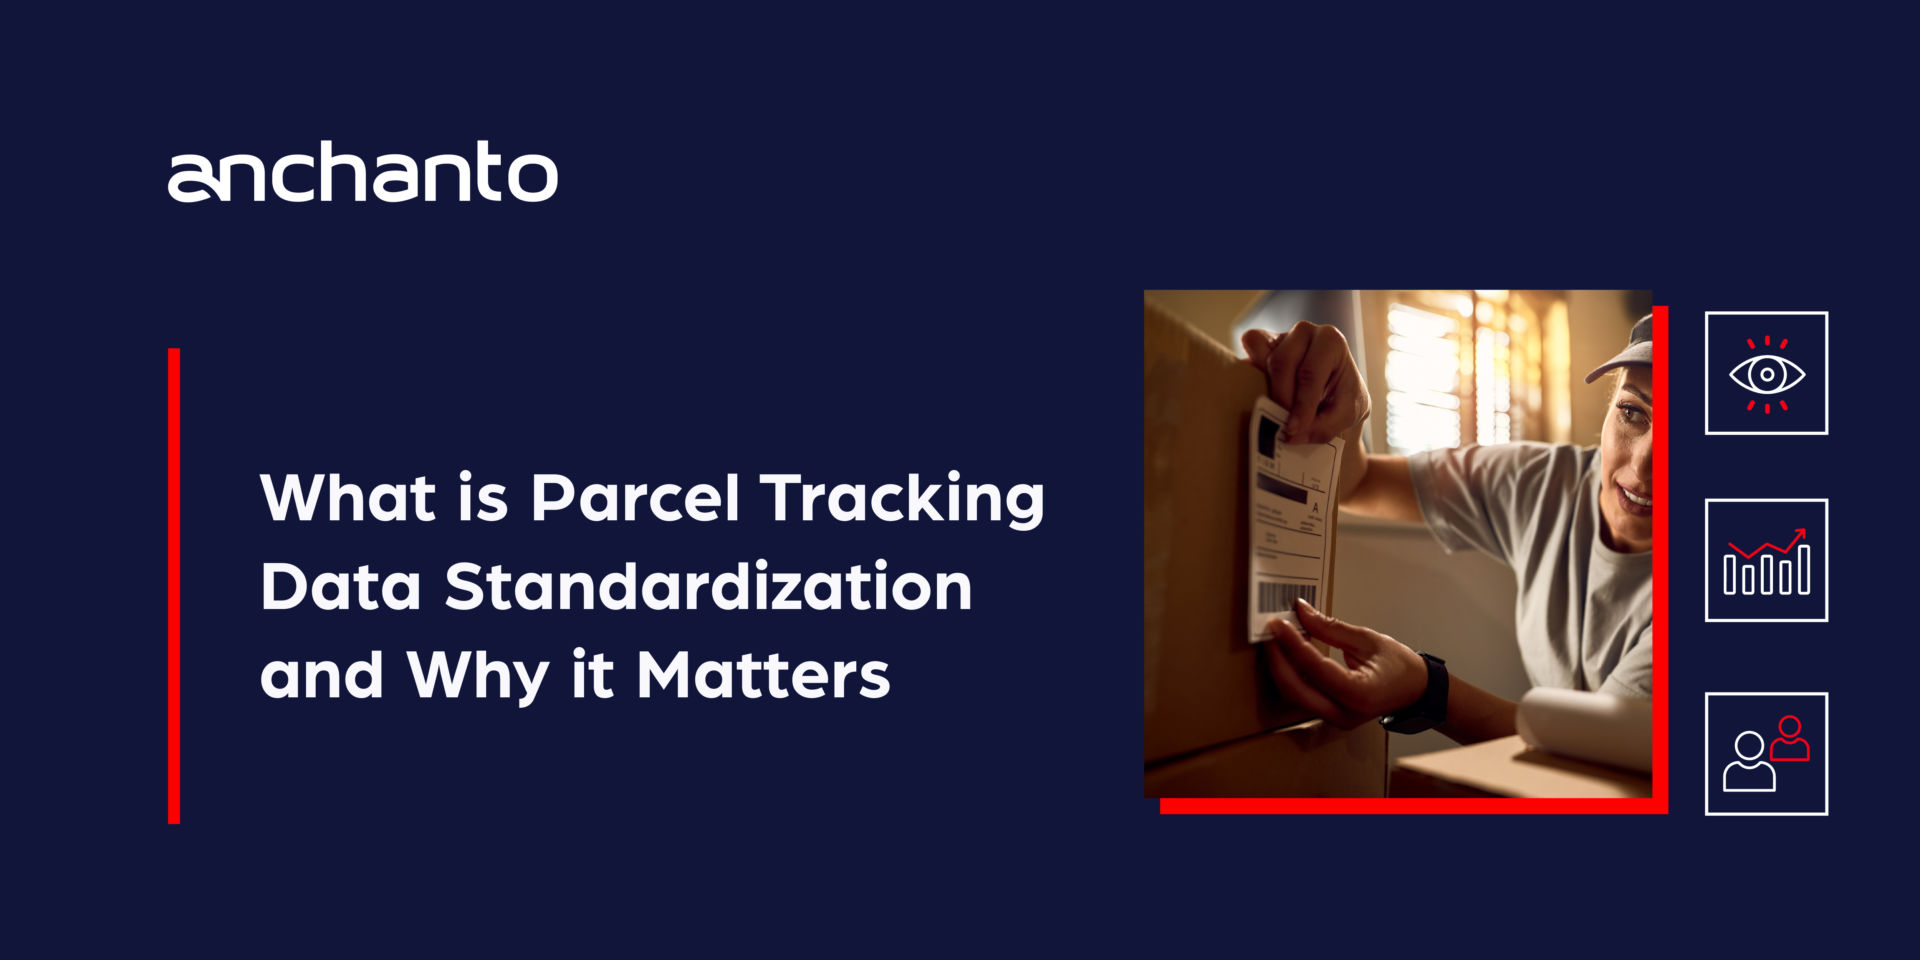 What is Parcel Tracking Data Standardization and Why it Matters